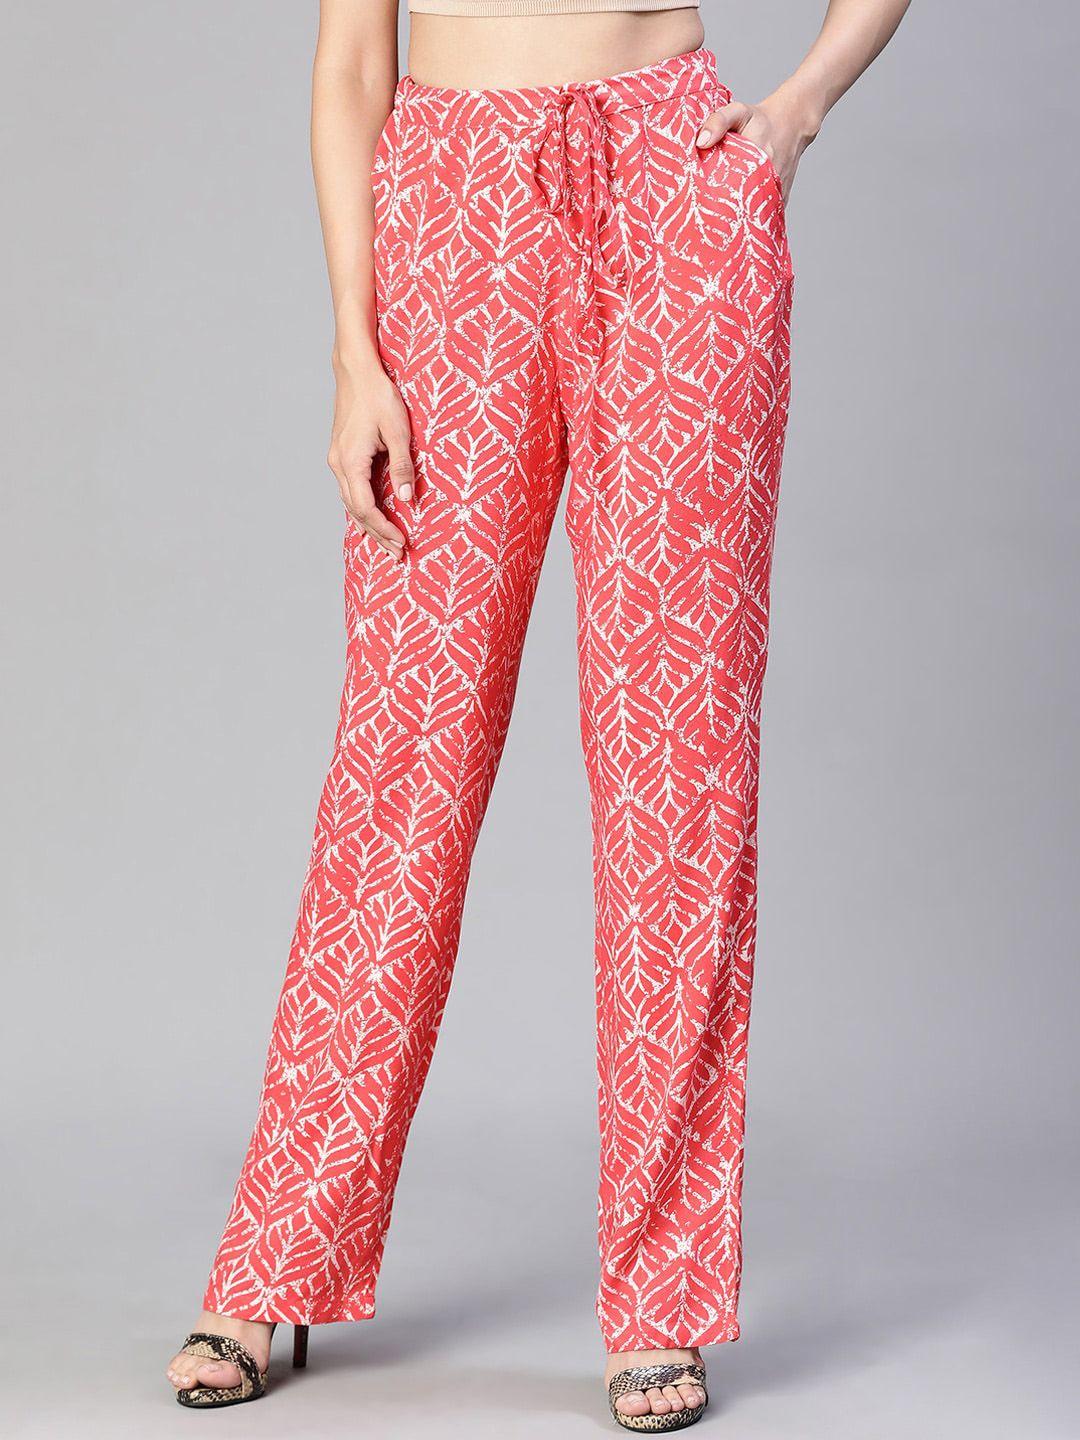 oxolloxo-women-floral-printed-relaxed-loose-fit-easy-wash-parallel-trousers